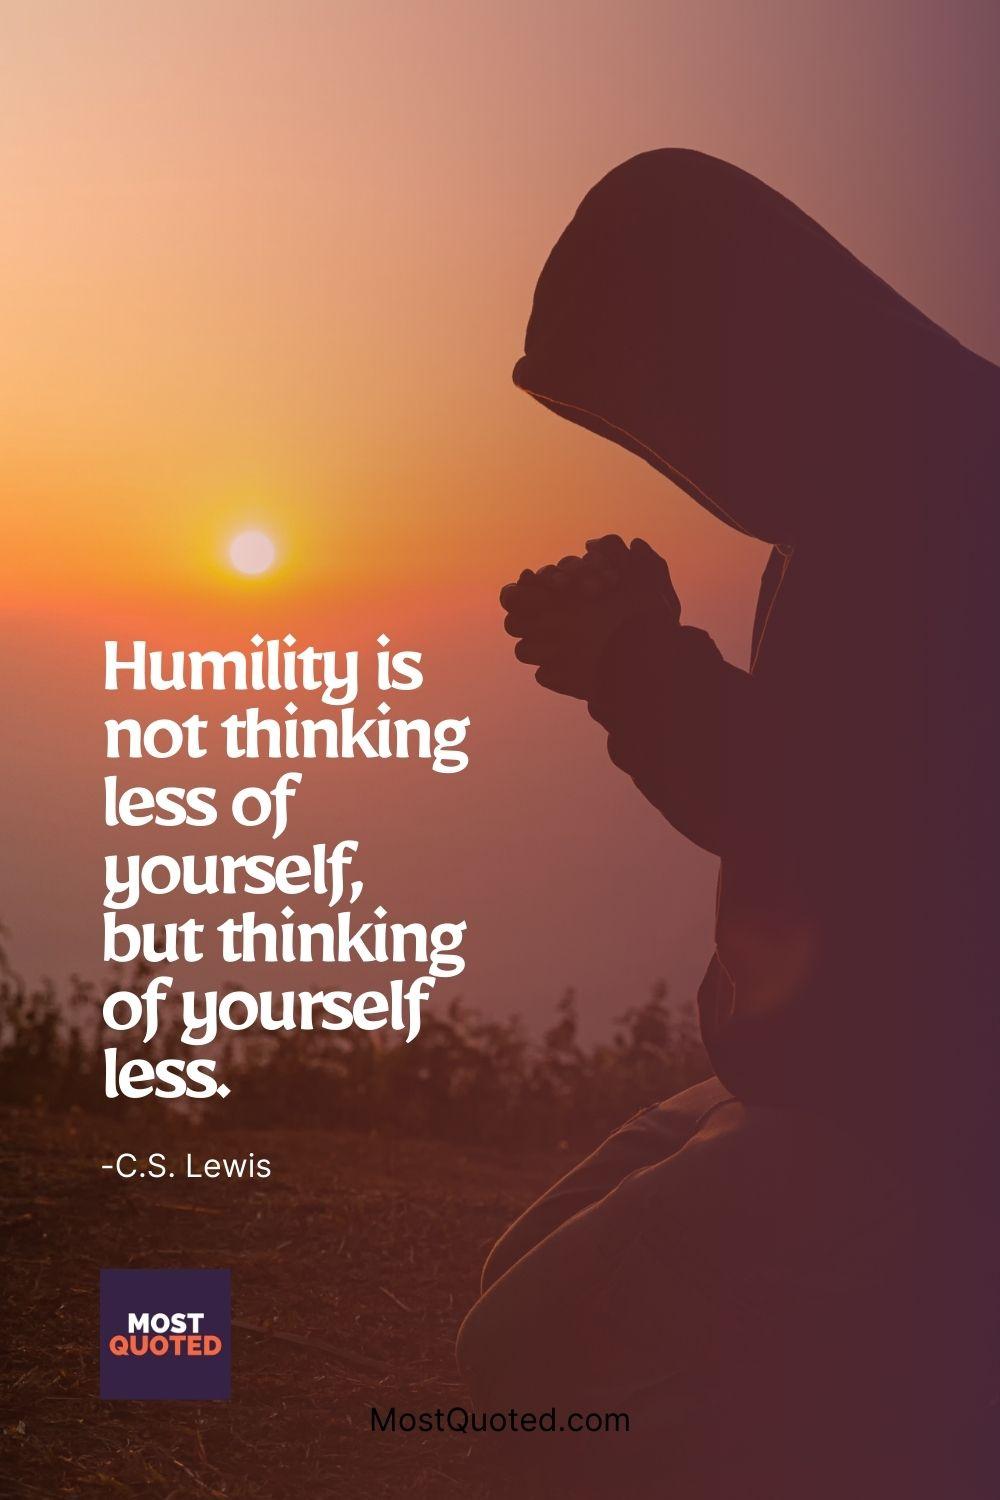 Humility is not thinking less of yourself, but thinking of yourself less. - C.S. Lewis